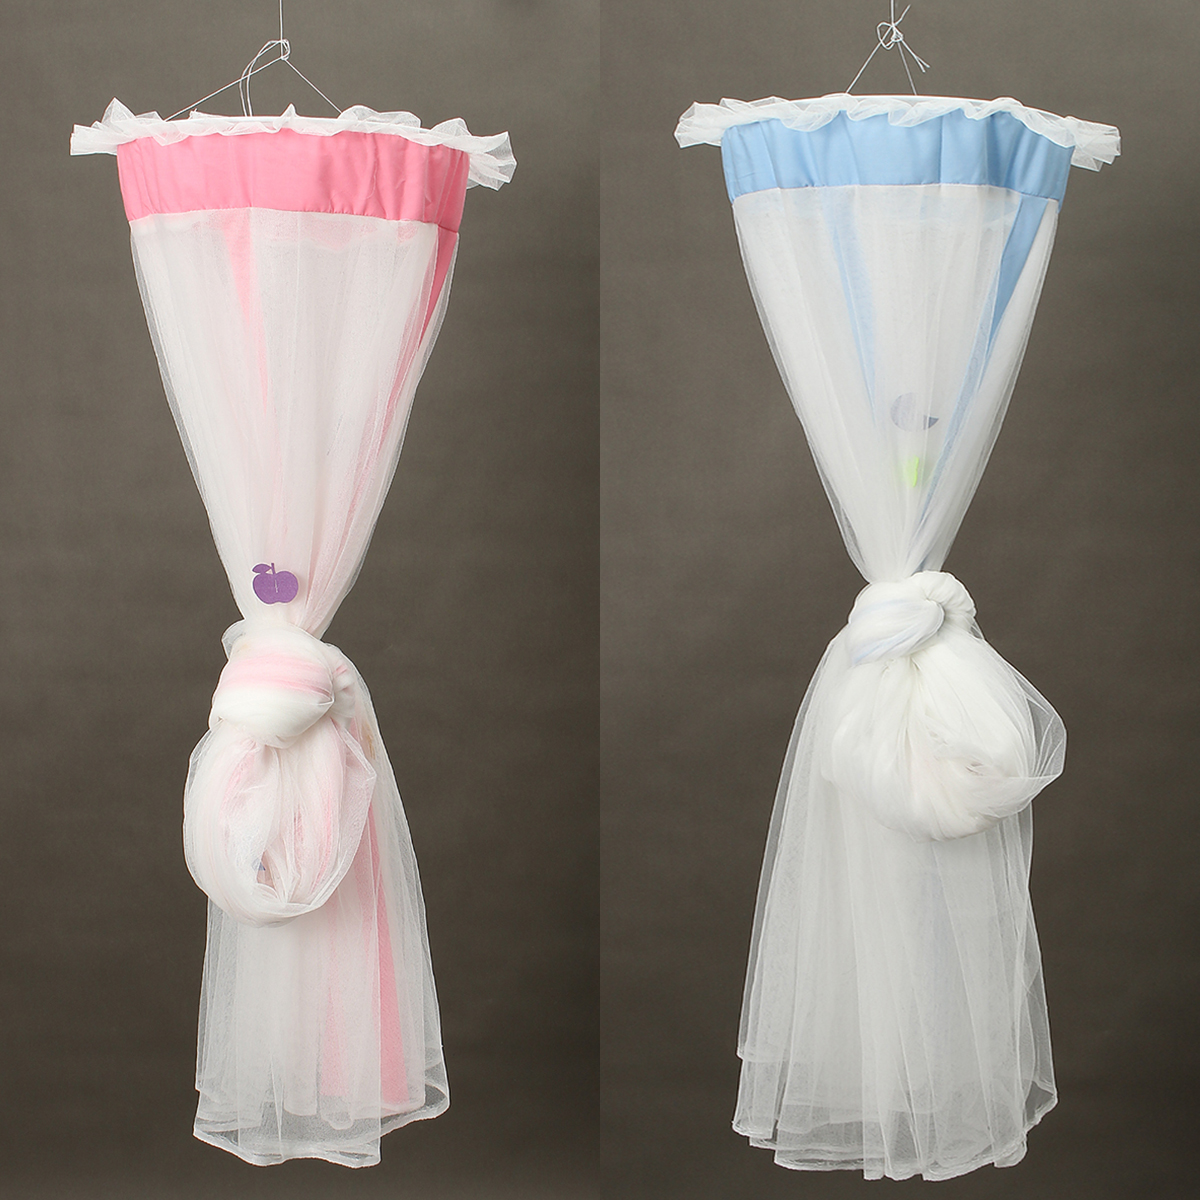 Mosquito-Net-Children-Bed-Curtain-Dome-Cot-Netting-Drape-Stand-Insect-Protection-1818006-4